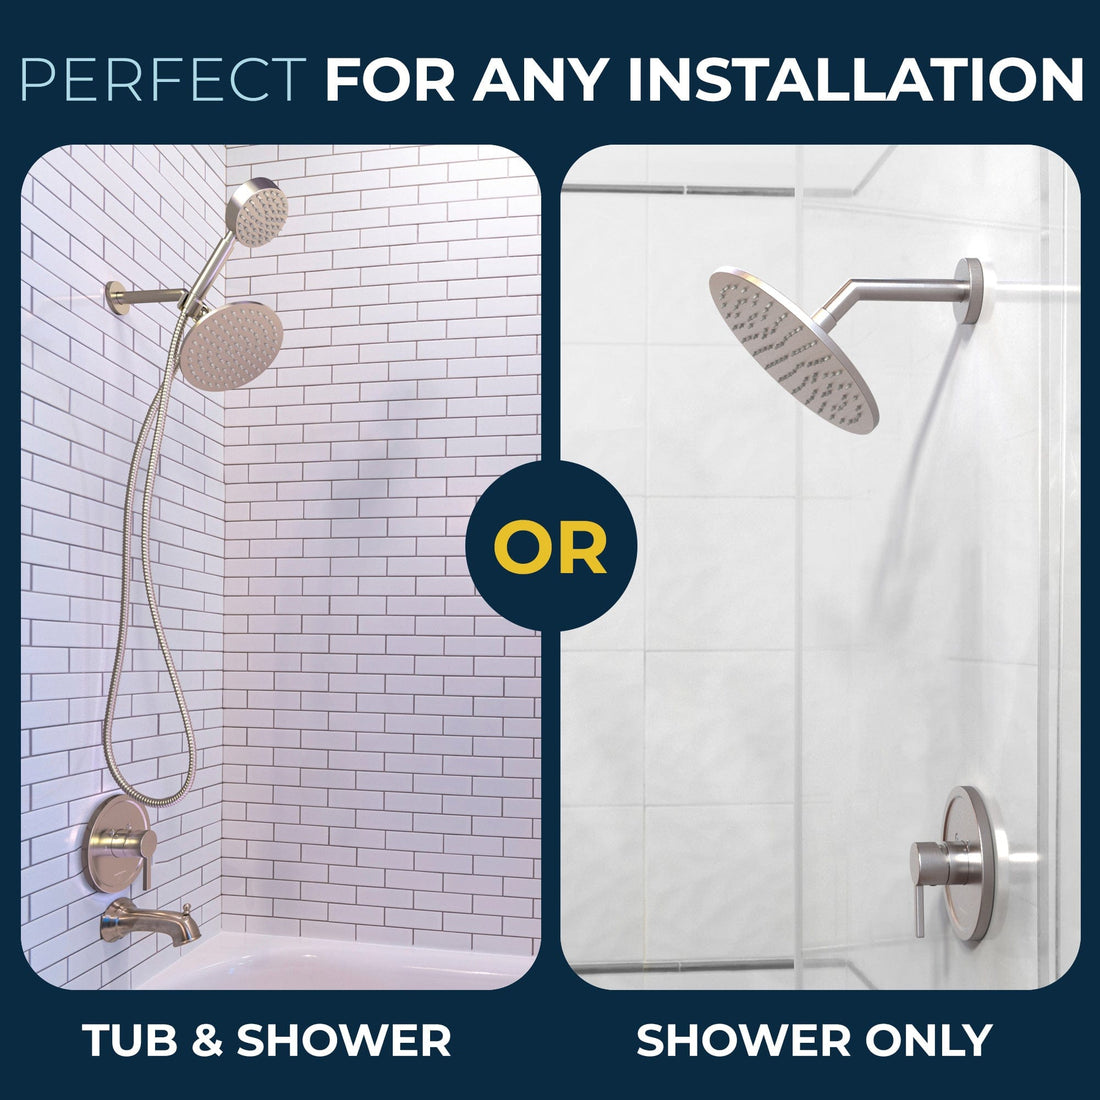 Works for Tub and Shower or Shower Only - All Metal 1-Handle Tub and Shower Valve with Trim Kit Oil Rubbed Bronze - The Shower Head Store